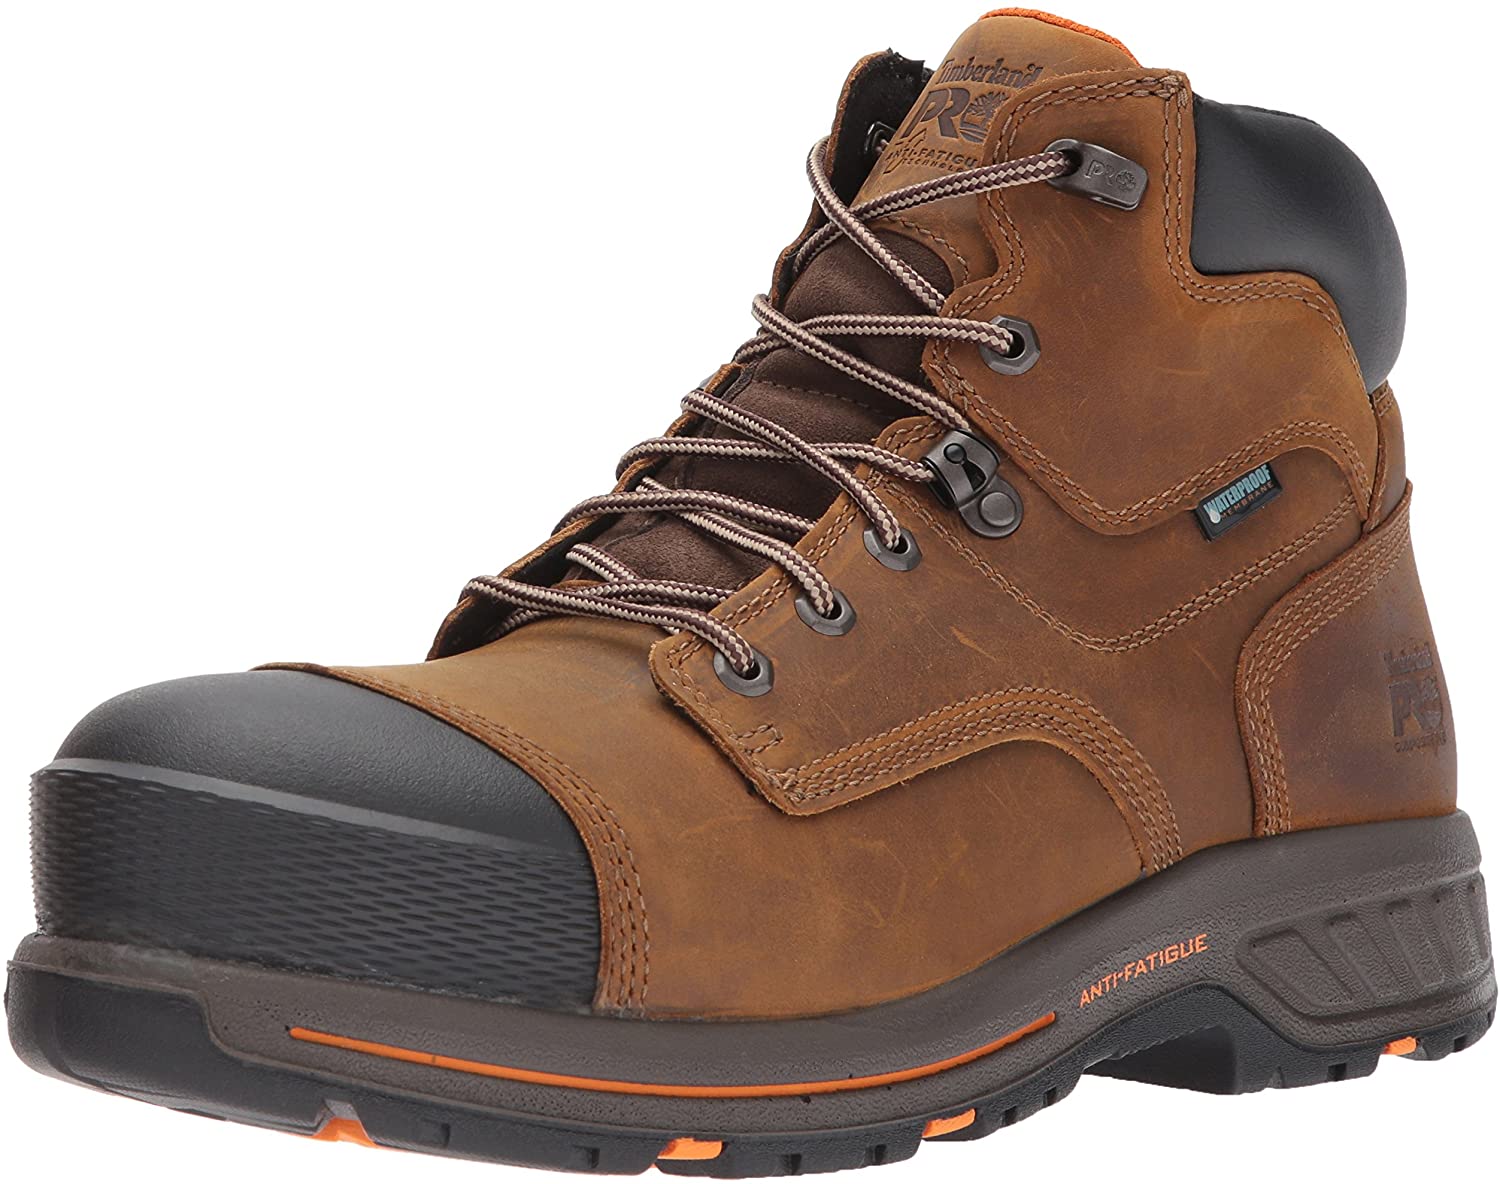 Men's Helix Waterproof Composite Lace-up Boot | safety shoes manufacturers